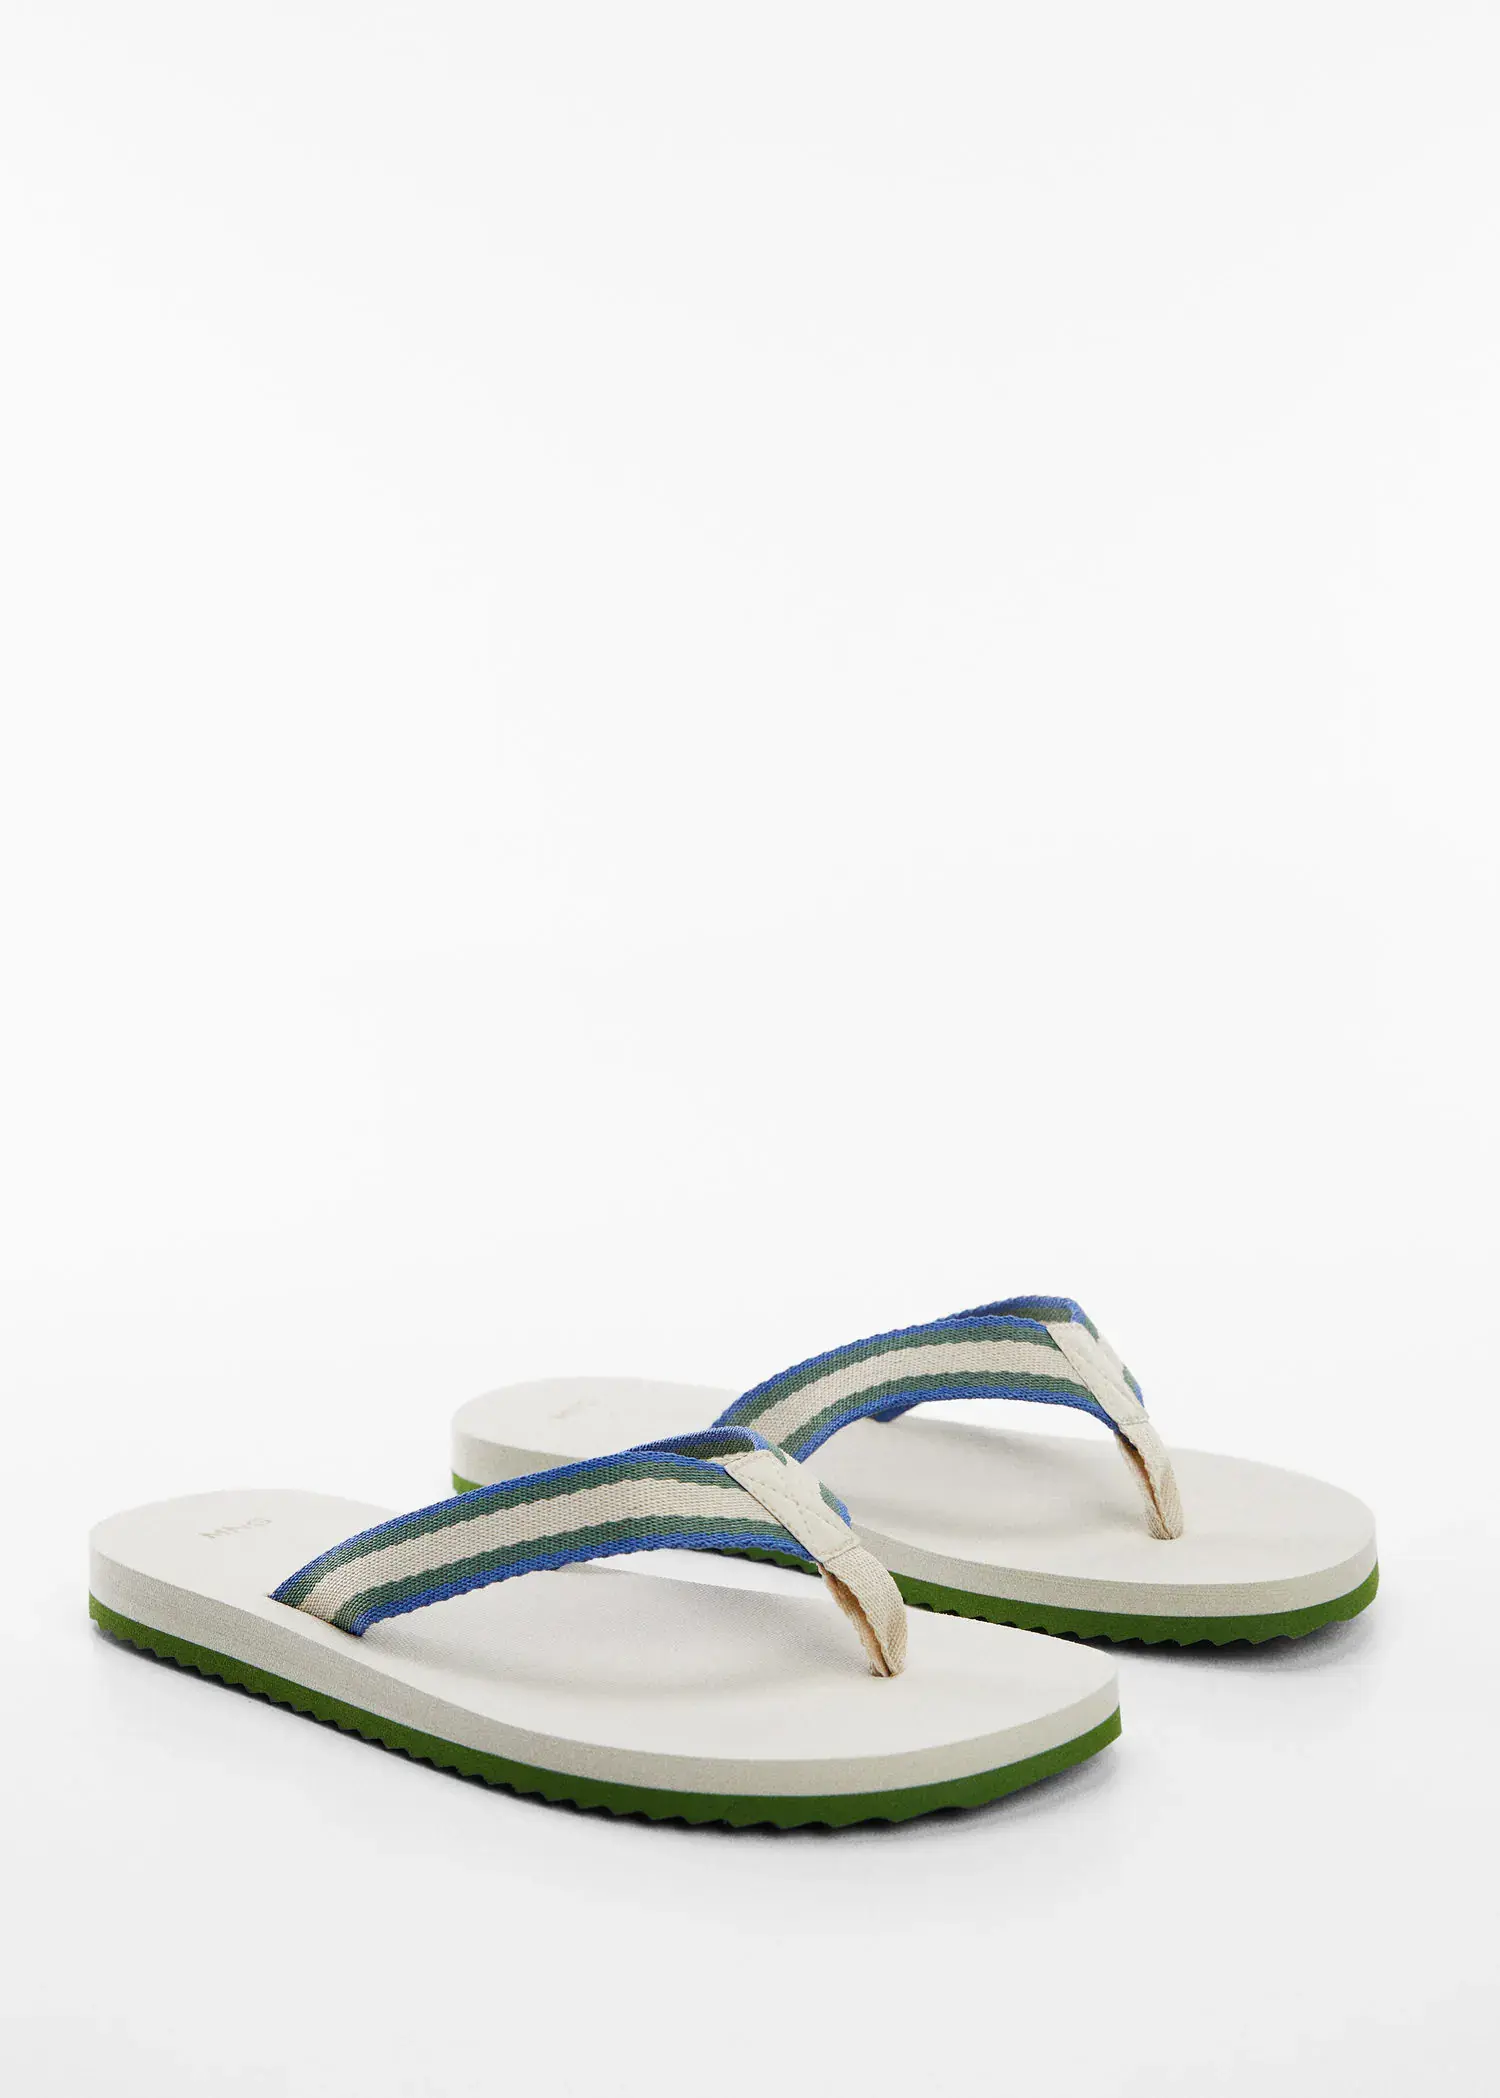 Mango Flip-flops with contrasting color straps. a pair of flip flops sitting on top of a white surface. 